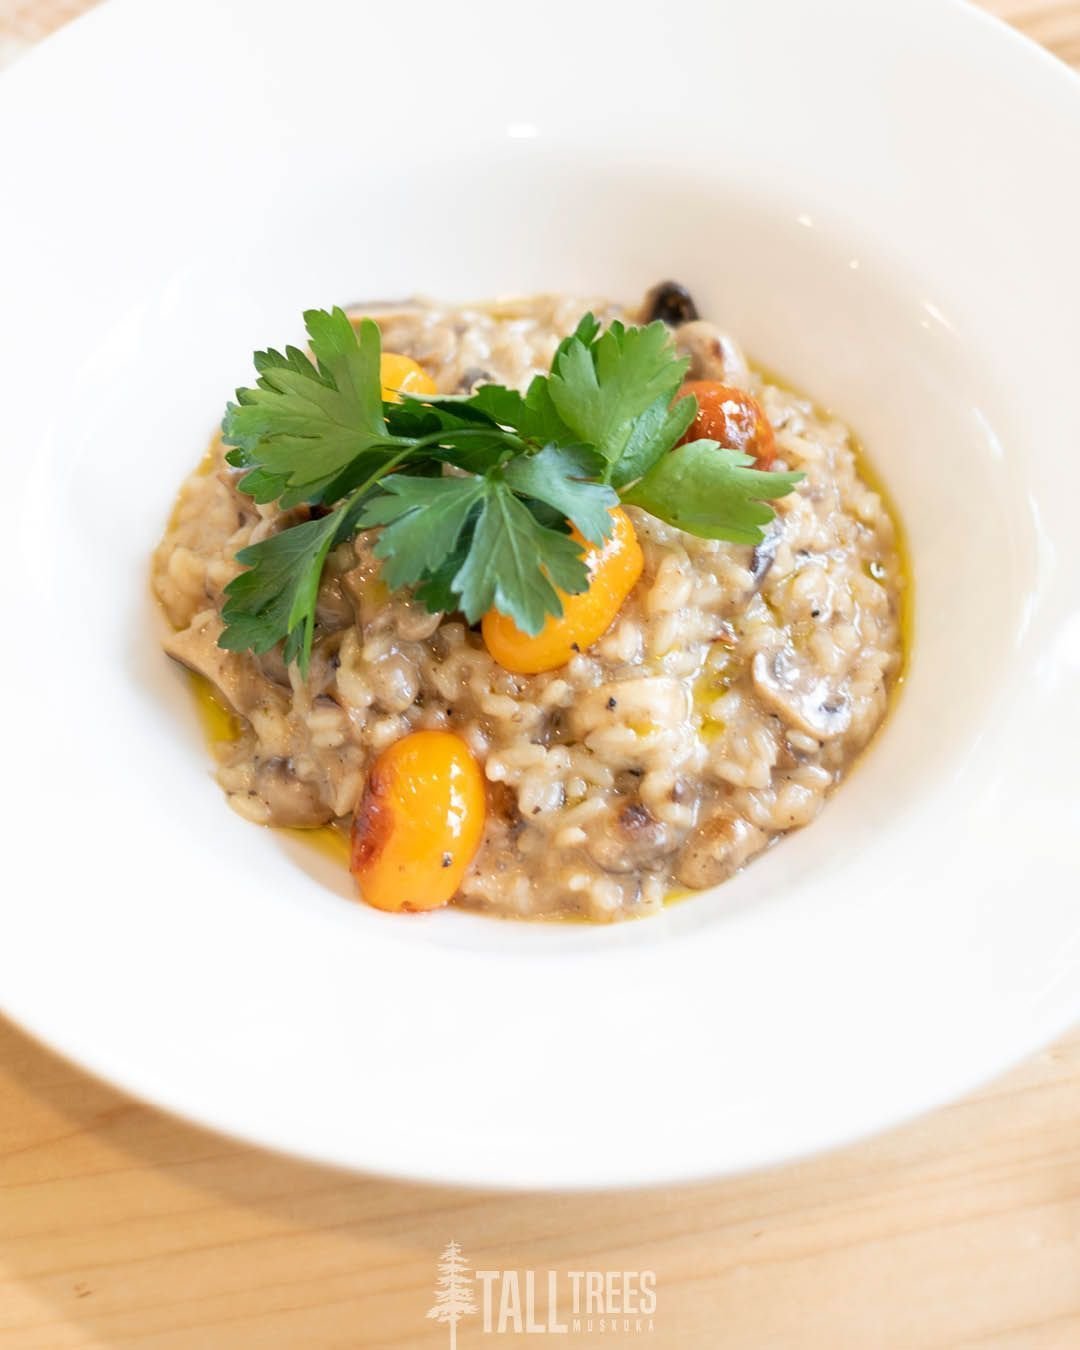 It may be spring, but it's never a bad time to enjoy a warm, hearty Aged White Cheddar and Truffle Risotto at Tall Trees!

Made with a blend of wild mushrooms and blistered cherry tomatoes, this dish is not only delicious but also a celebration of na